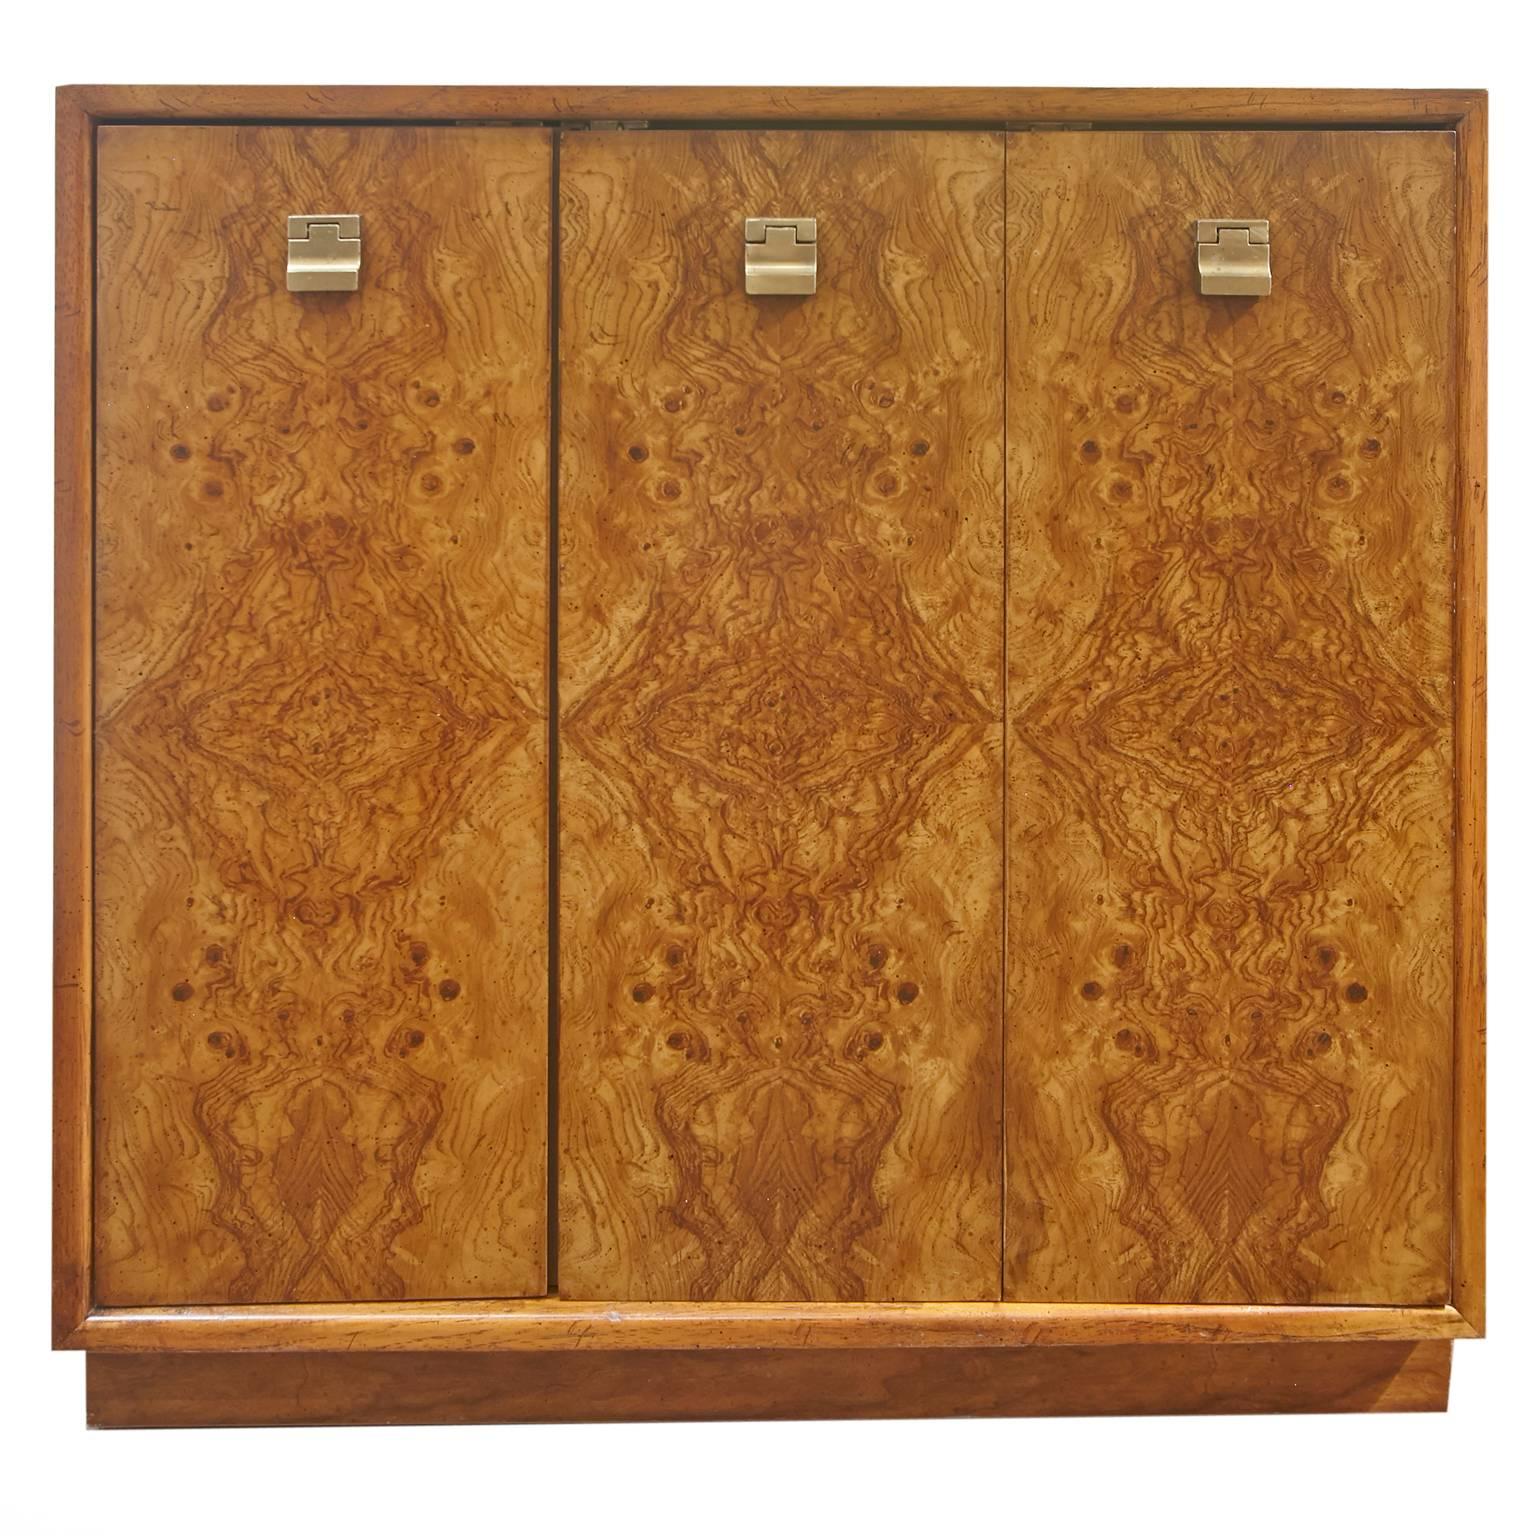 American Pair of Edward Wormley Burl Wood Cabinets for Drexel Precedent